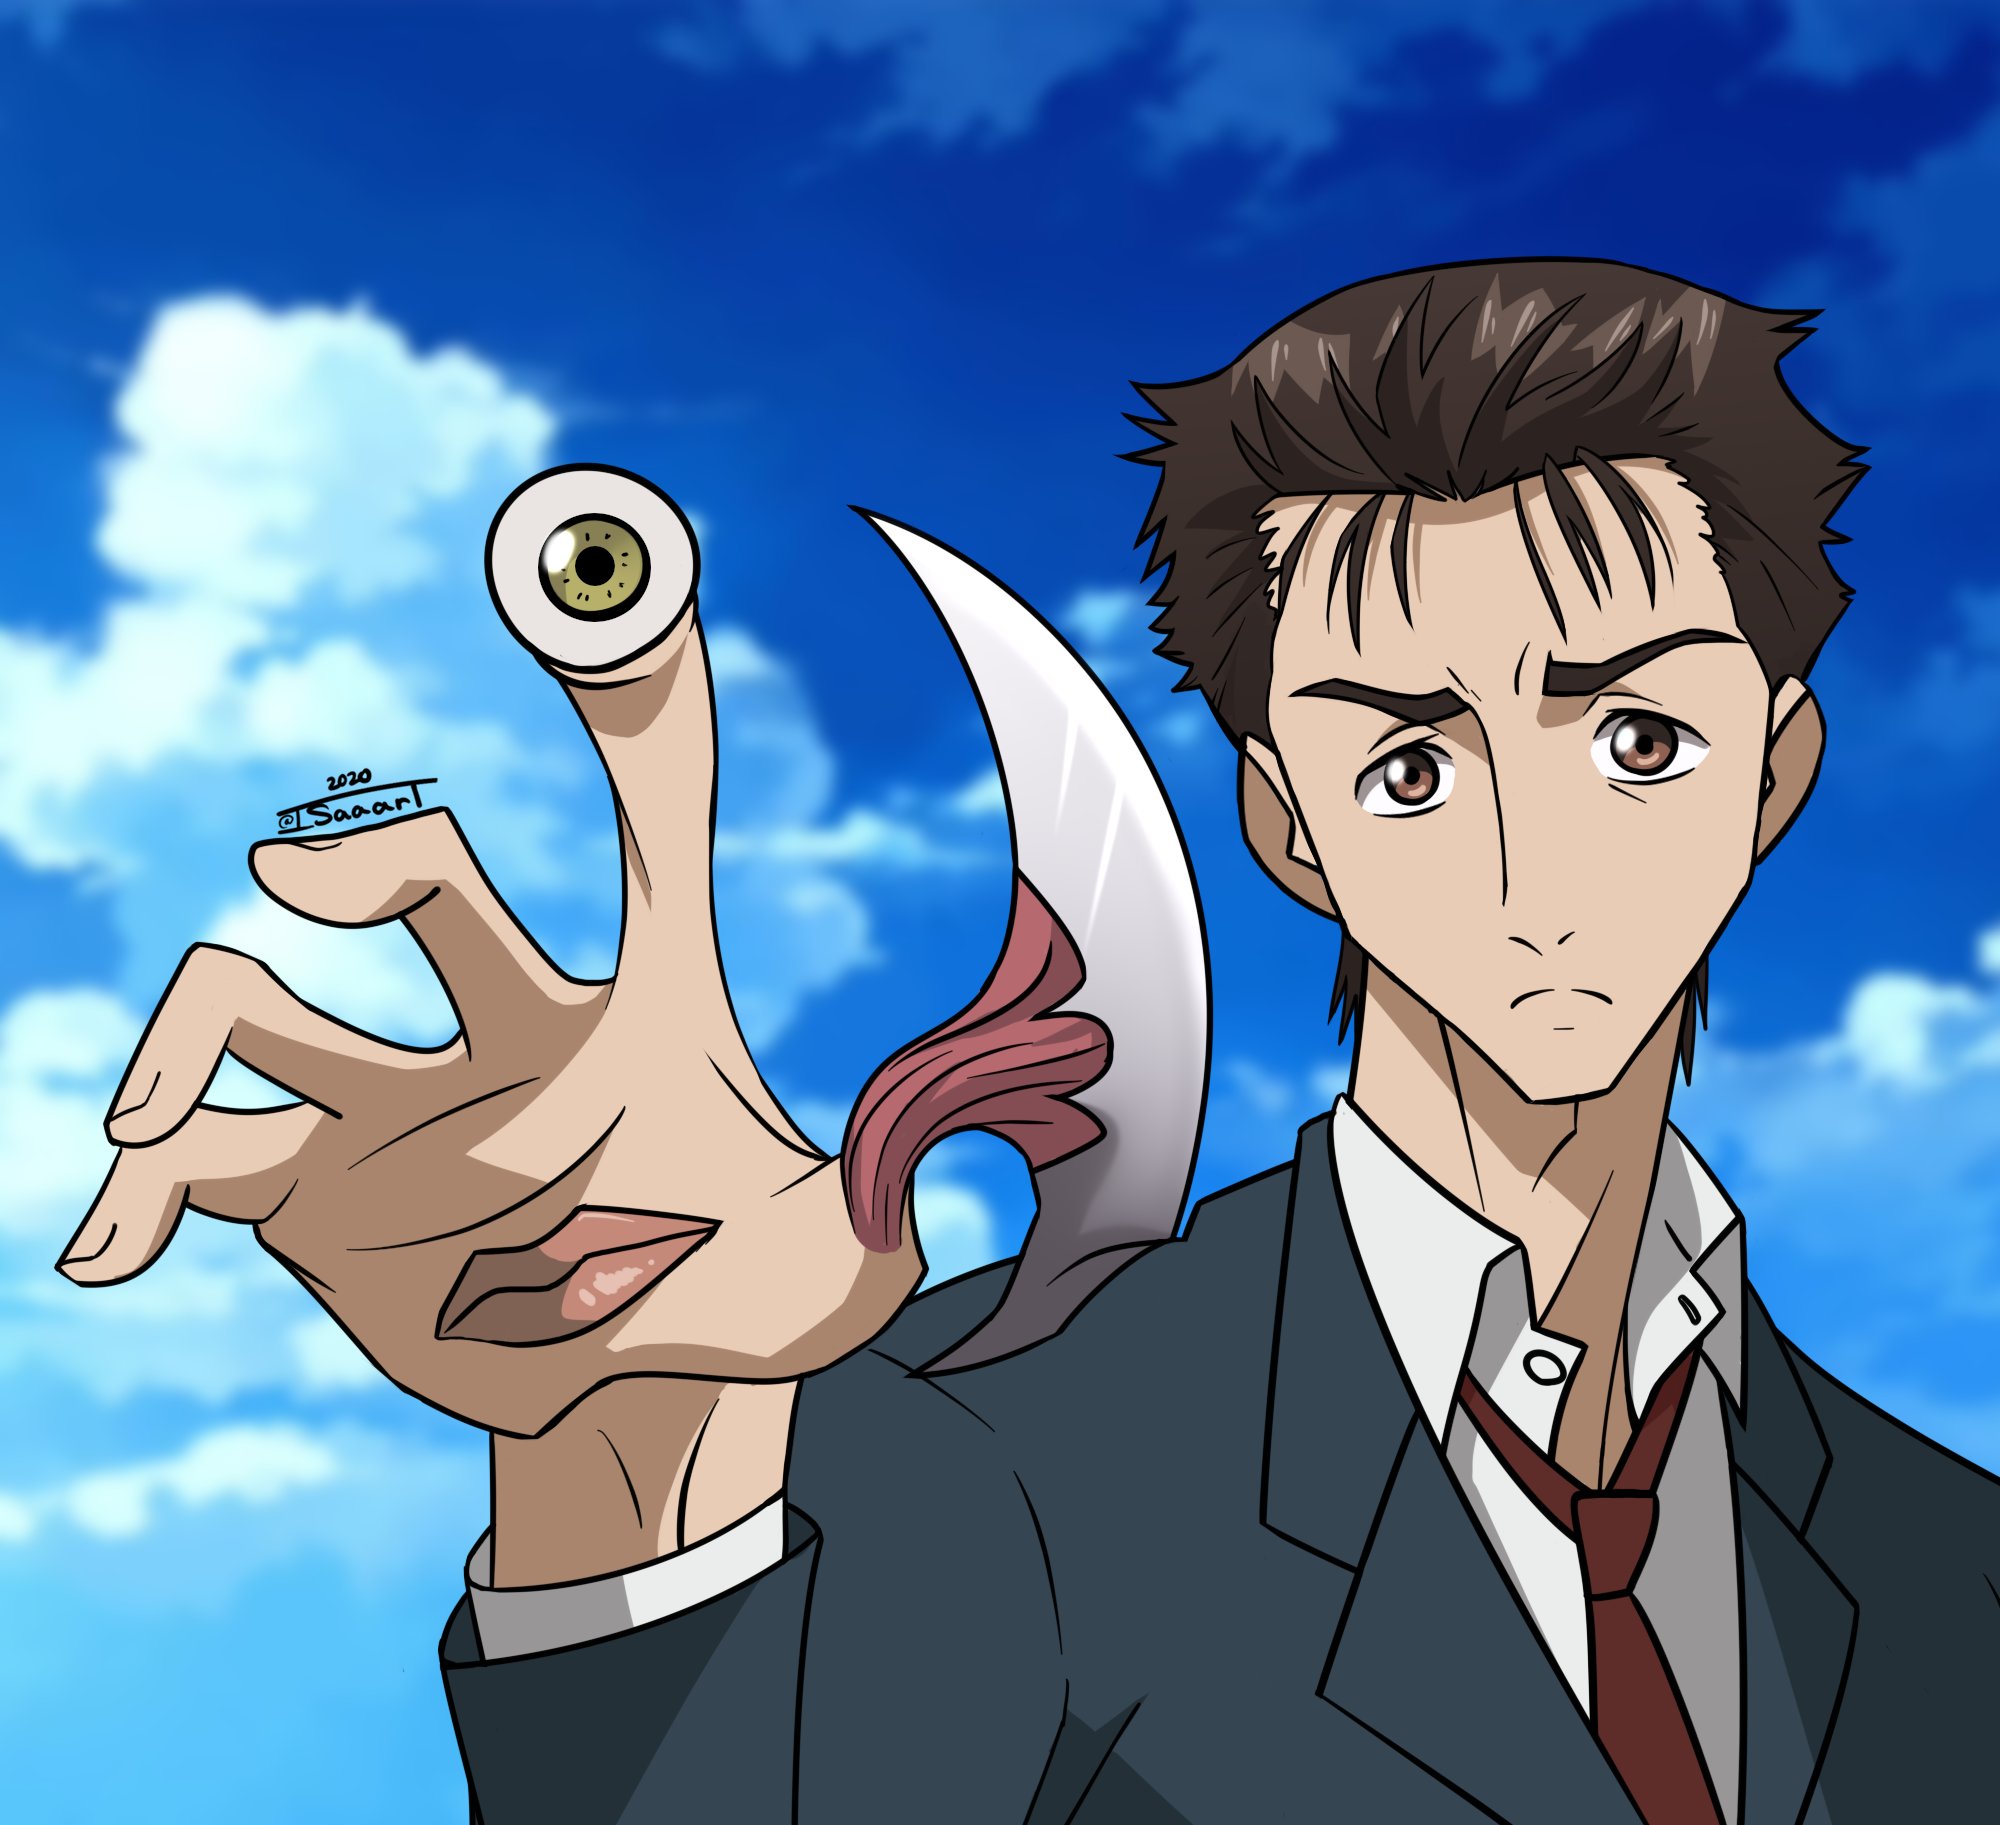 Share 140+ parasyte anime characters best